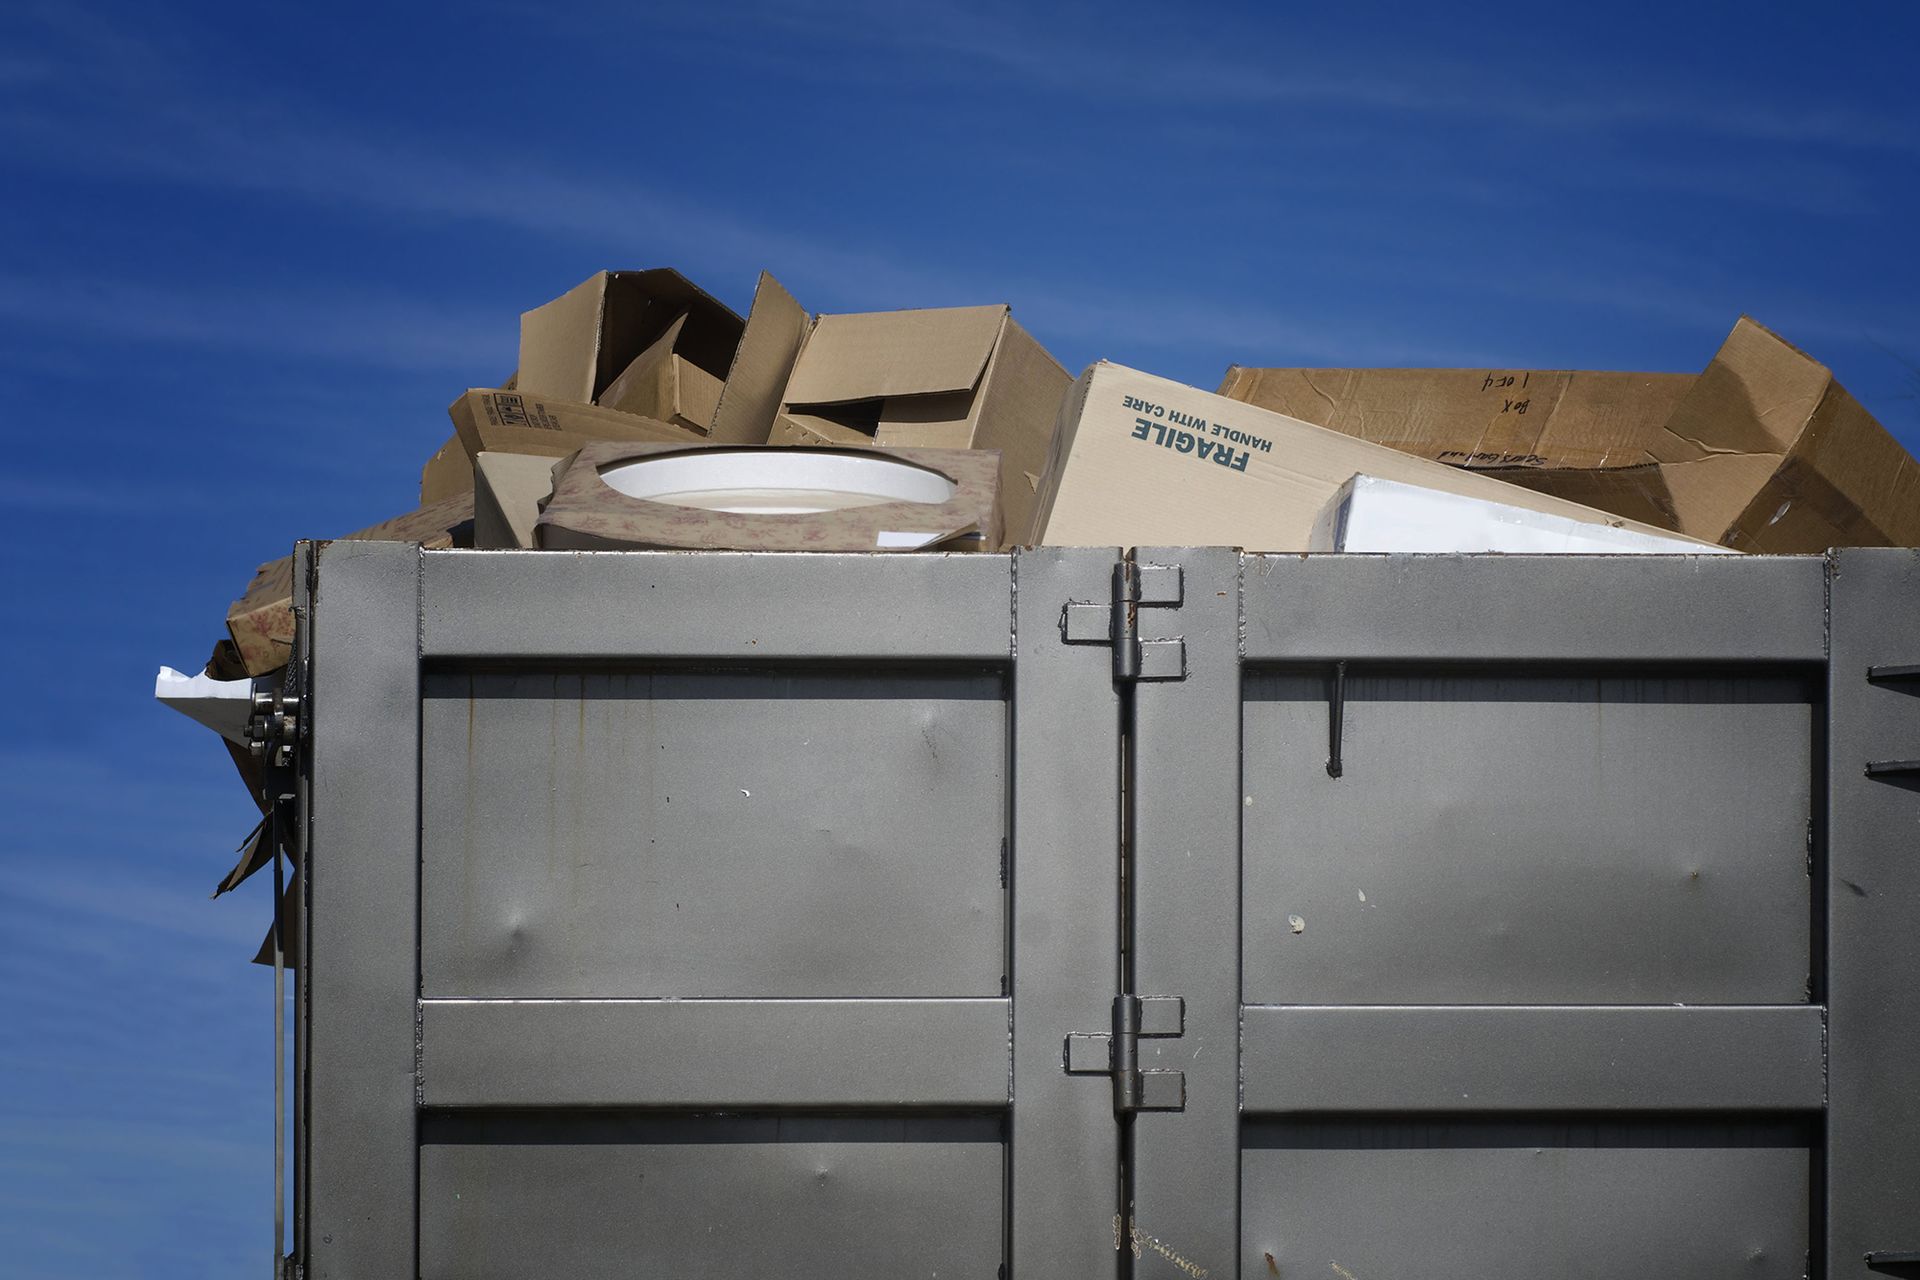 Dumpster Filled With Cardboard Boxes